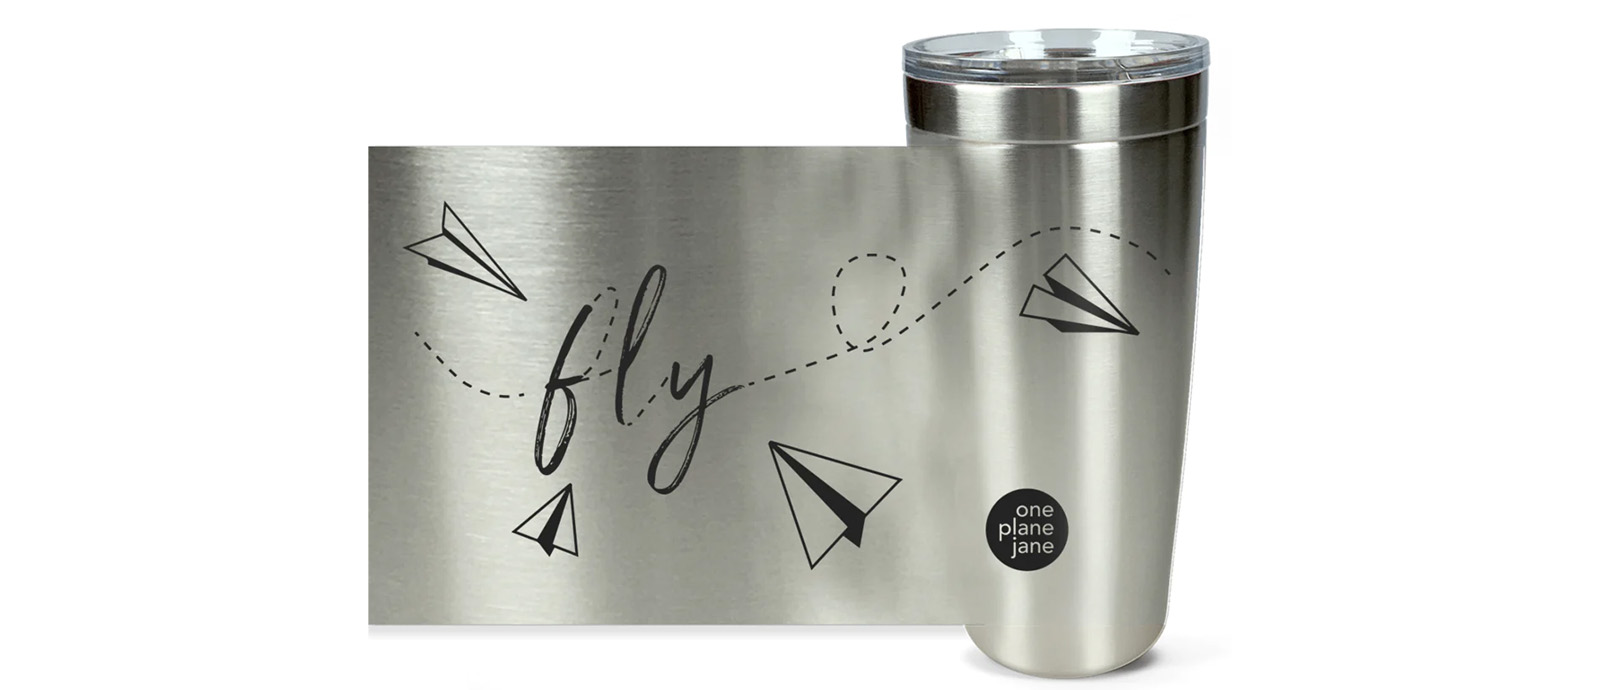 A thermal coffee mug edited to show the wrapped paper airplane design